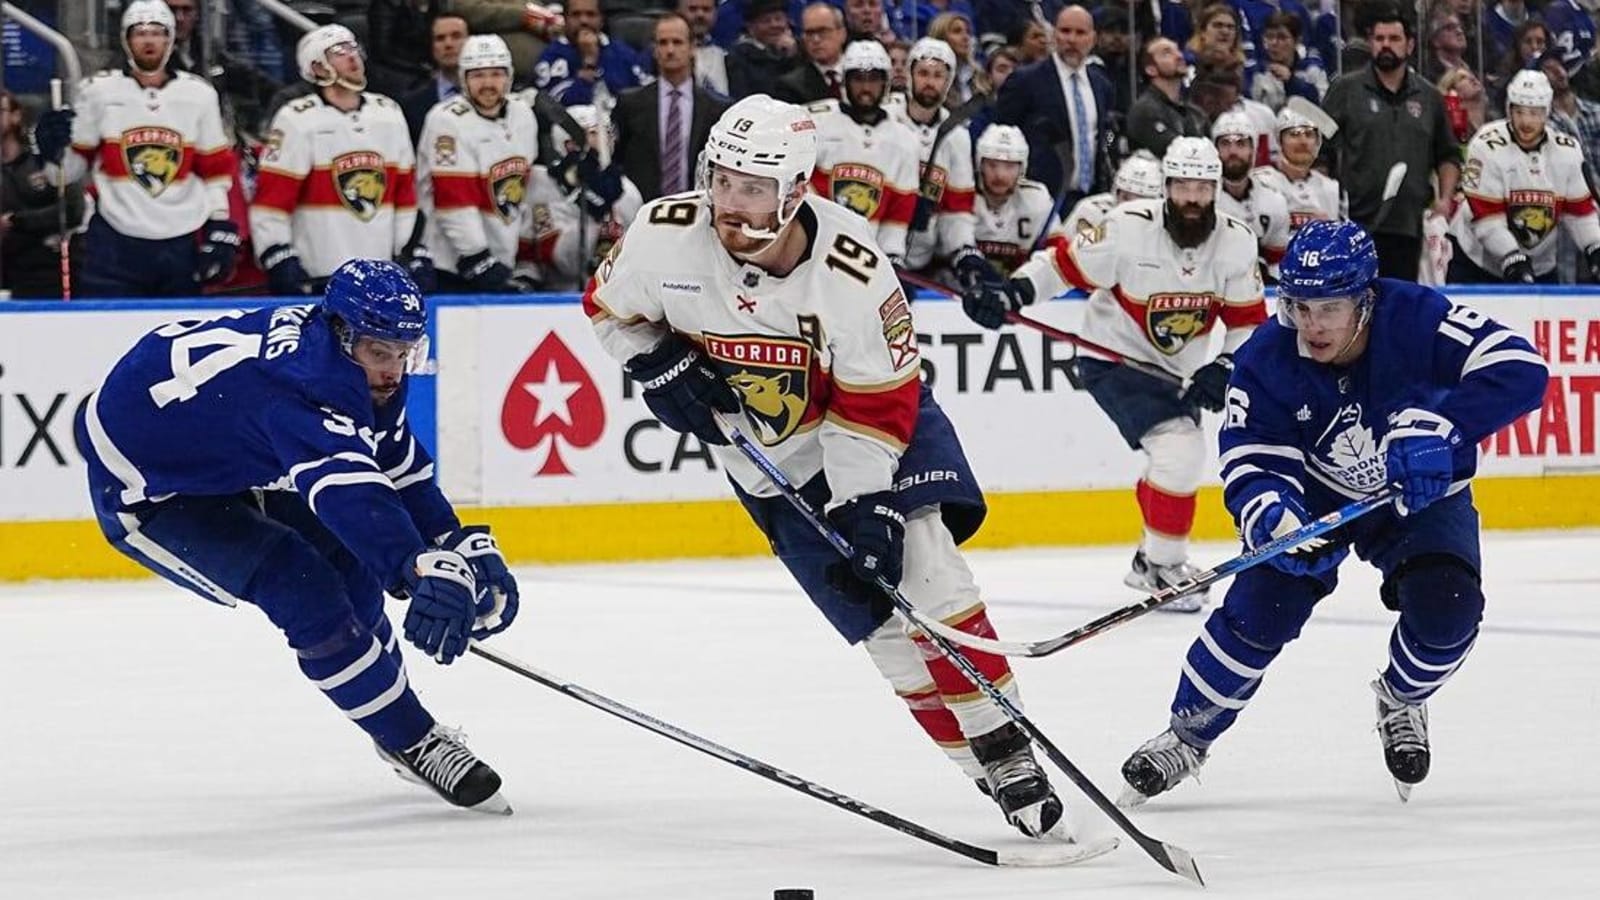 Toronto Maple Leafs at Florida Panthers Game 4 prediction, pick for 5/10